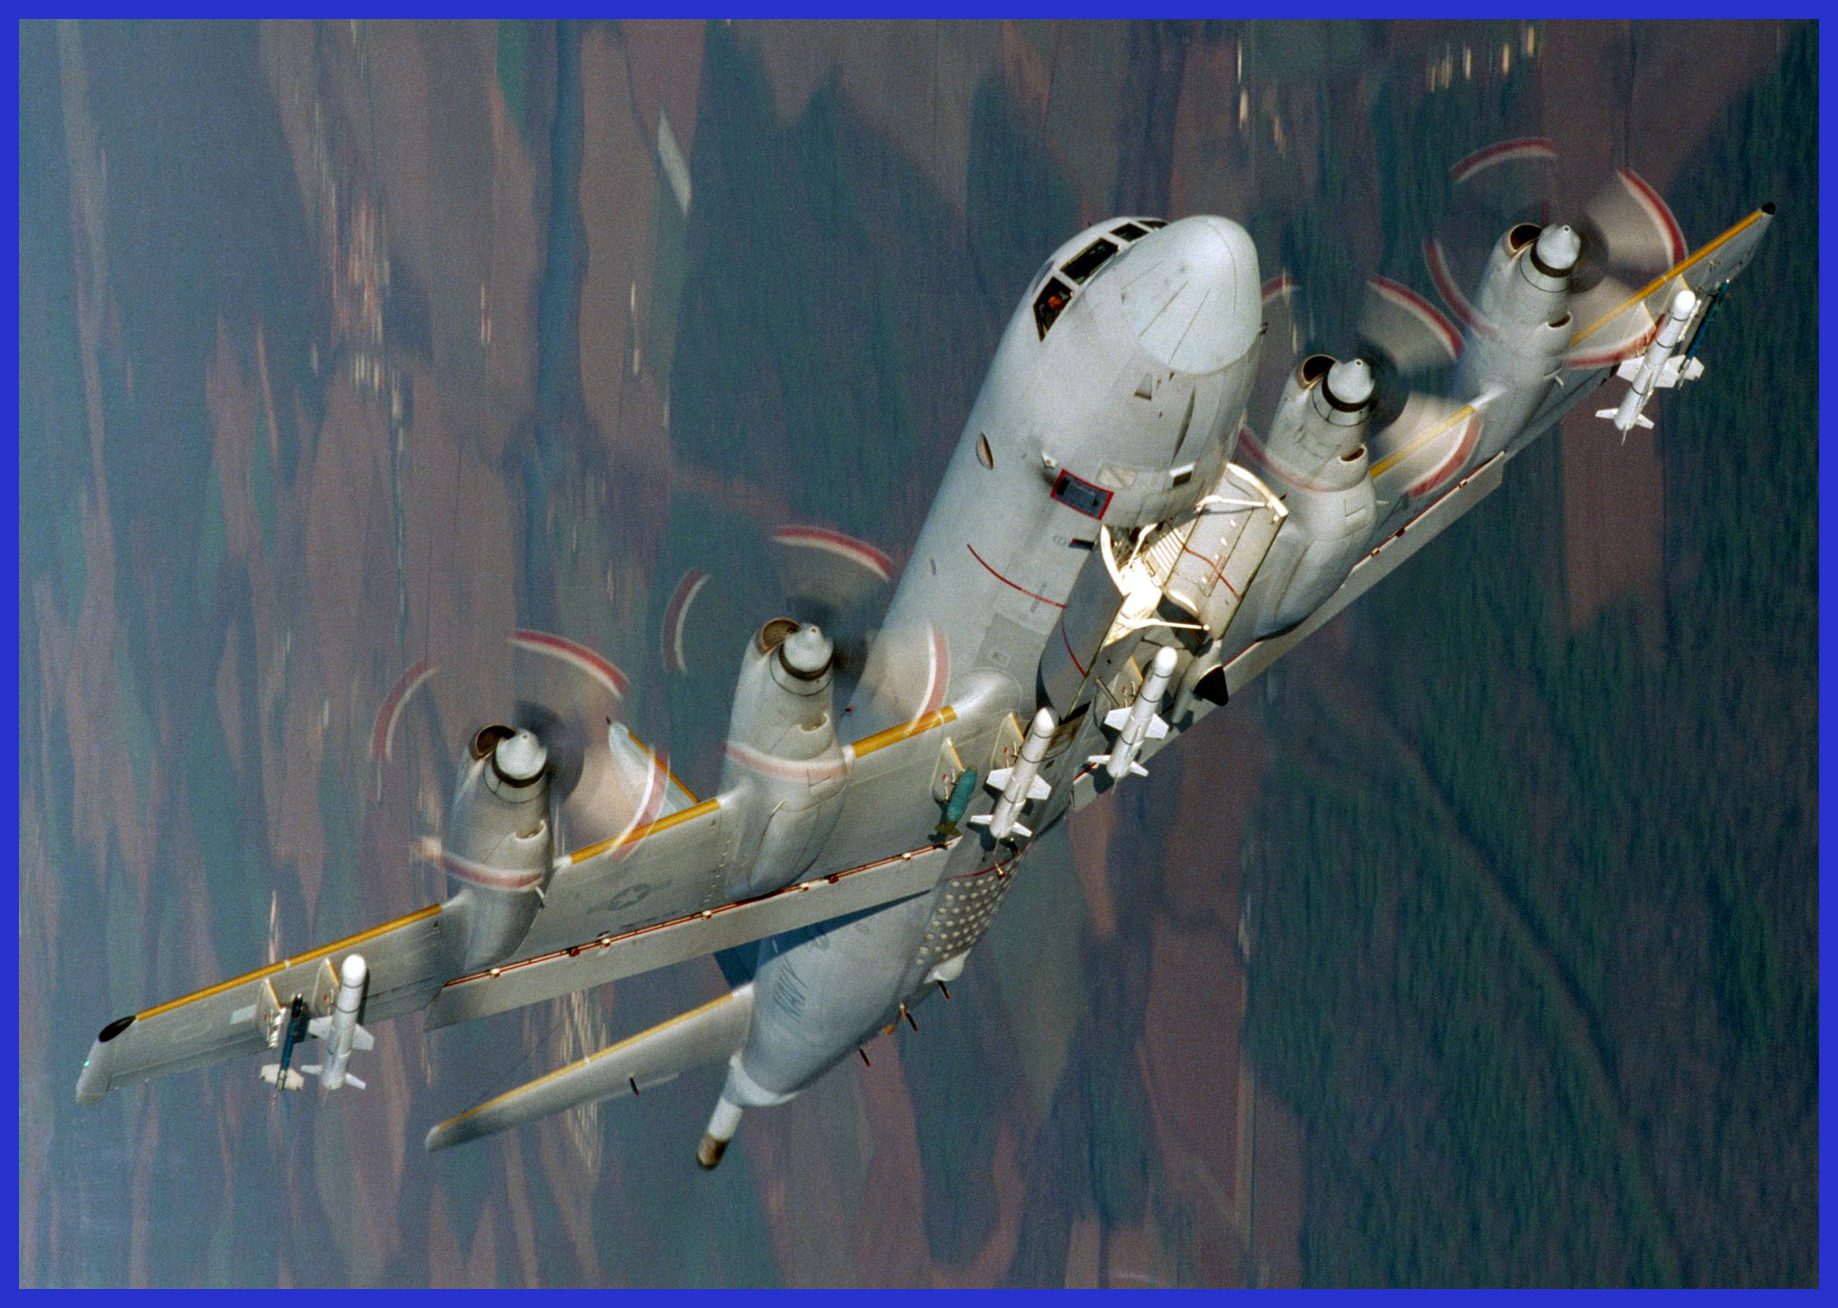 Photo Credit: USN / A very rare image showing a P-3C Orion being equipped with four AGM-84 Harpoon missiles and two Sidewinder air-to-air missiles